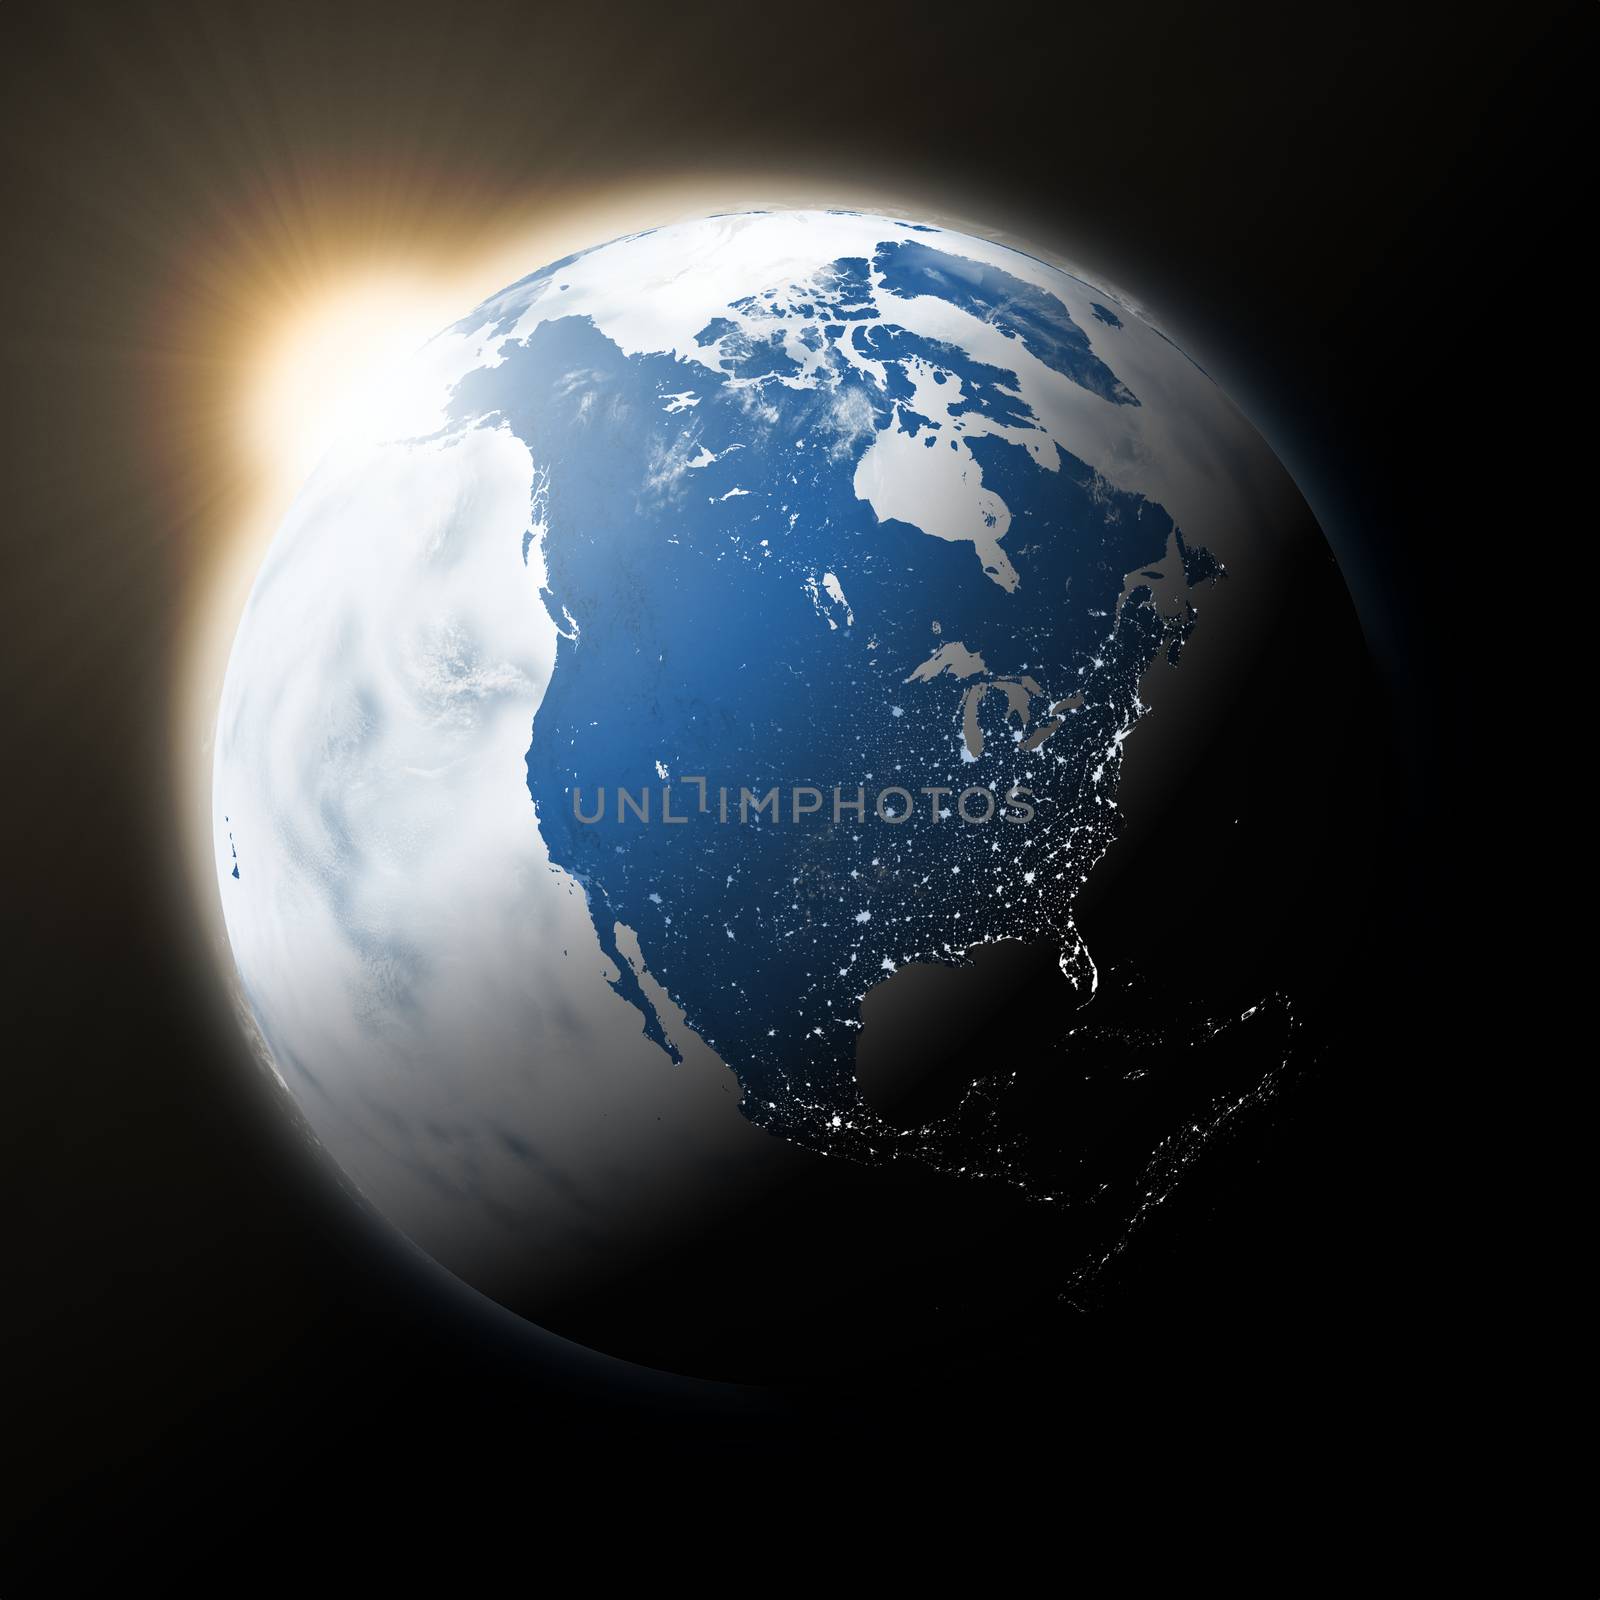 Sun over North America on planet Earth by Harvepino